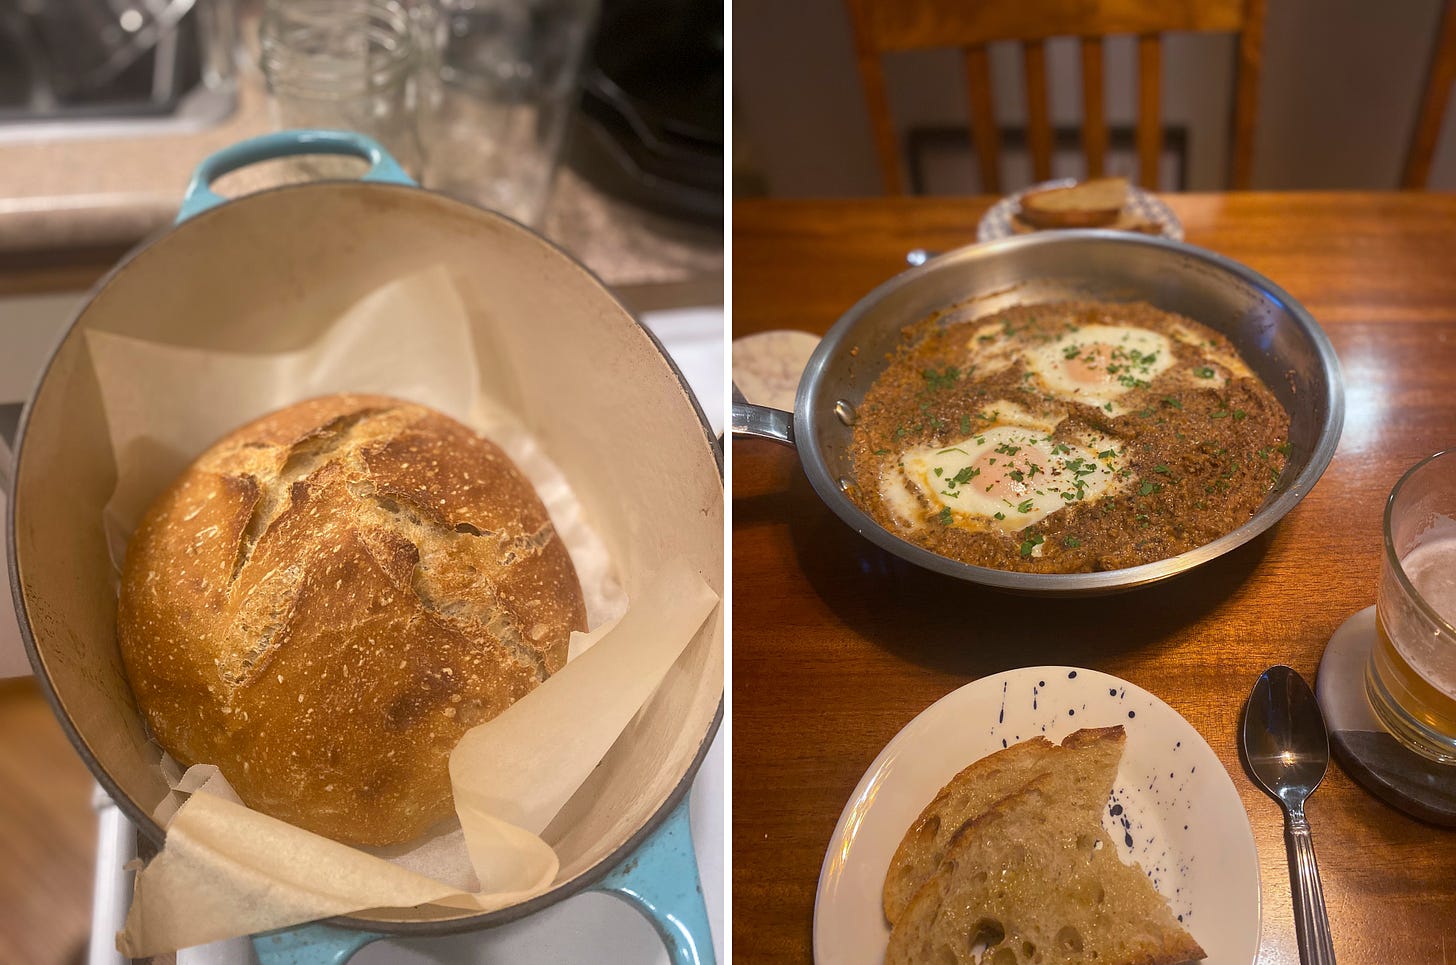 Left image: a sourdough boule with a cross scored into the top, surrounded by parchment in a light blue Le Creuset. Right image: slices of the bread on two side plates, and between them, a stainless steel pan of creamy-looking tomato sauce with two poached eggs in it. Parsley is dusted over the top.